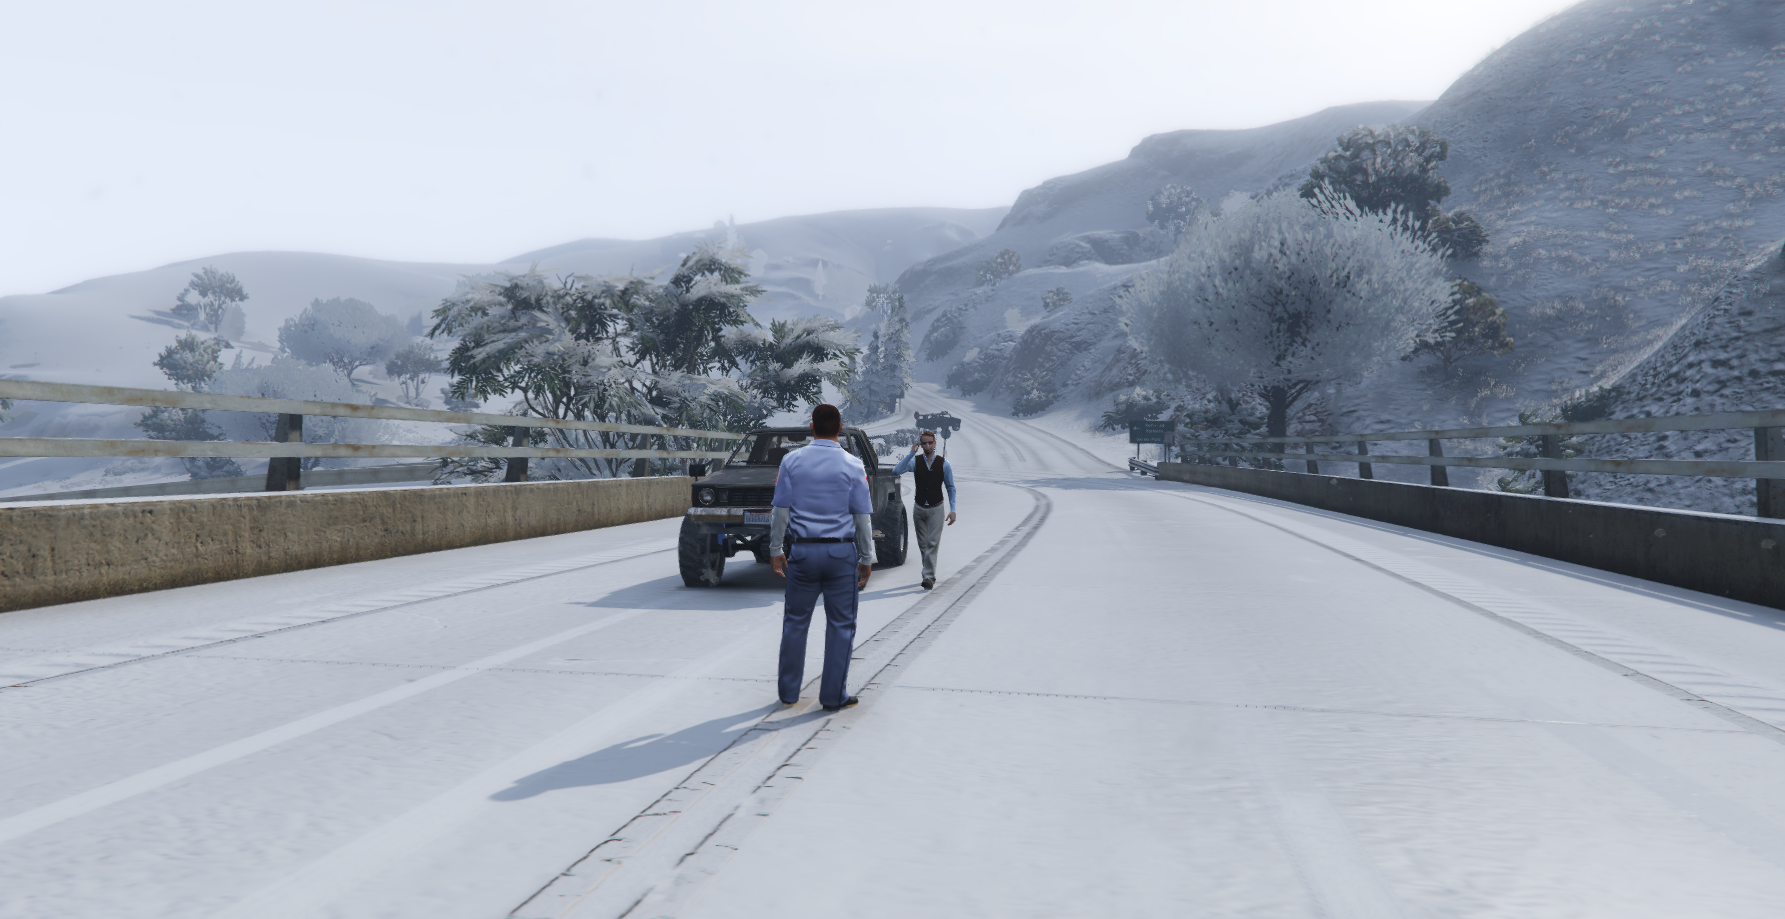 Working a 95 in GTA 5 roleplay is the best way to enjoy Grand Theft Auto